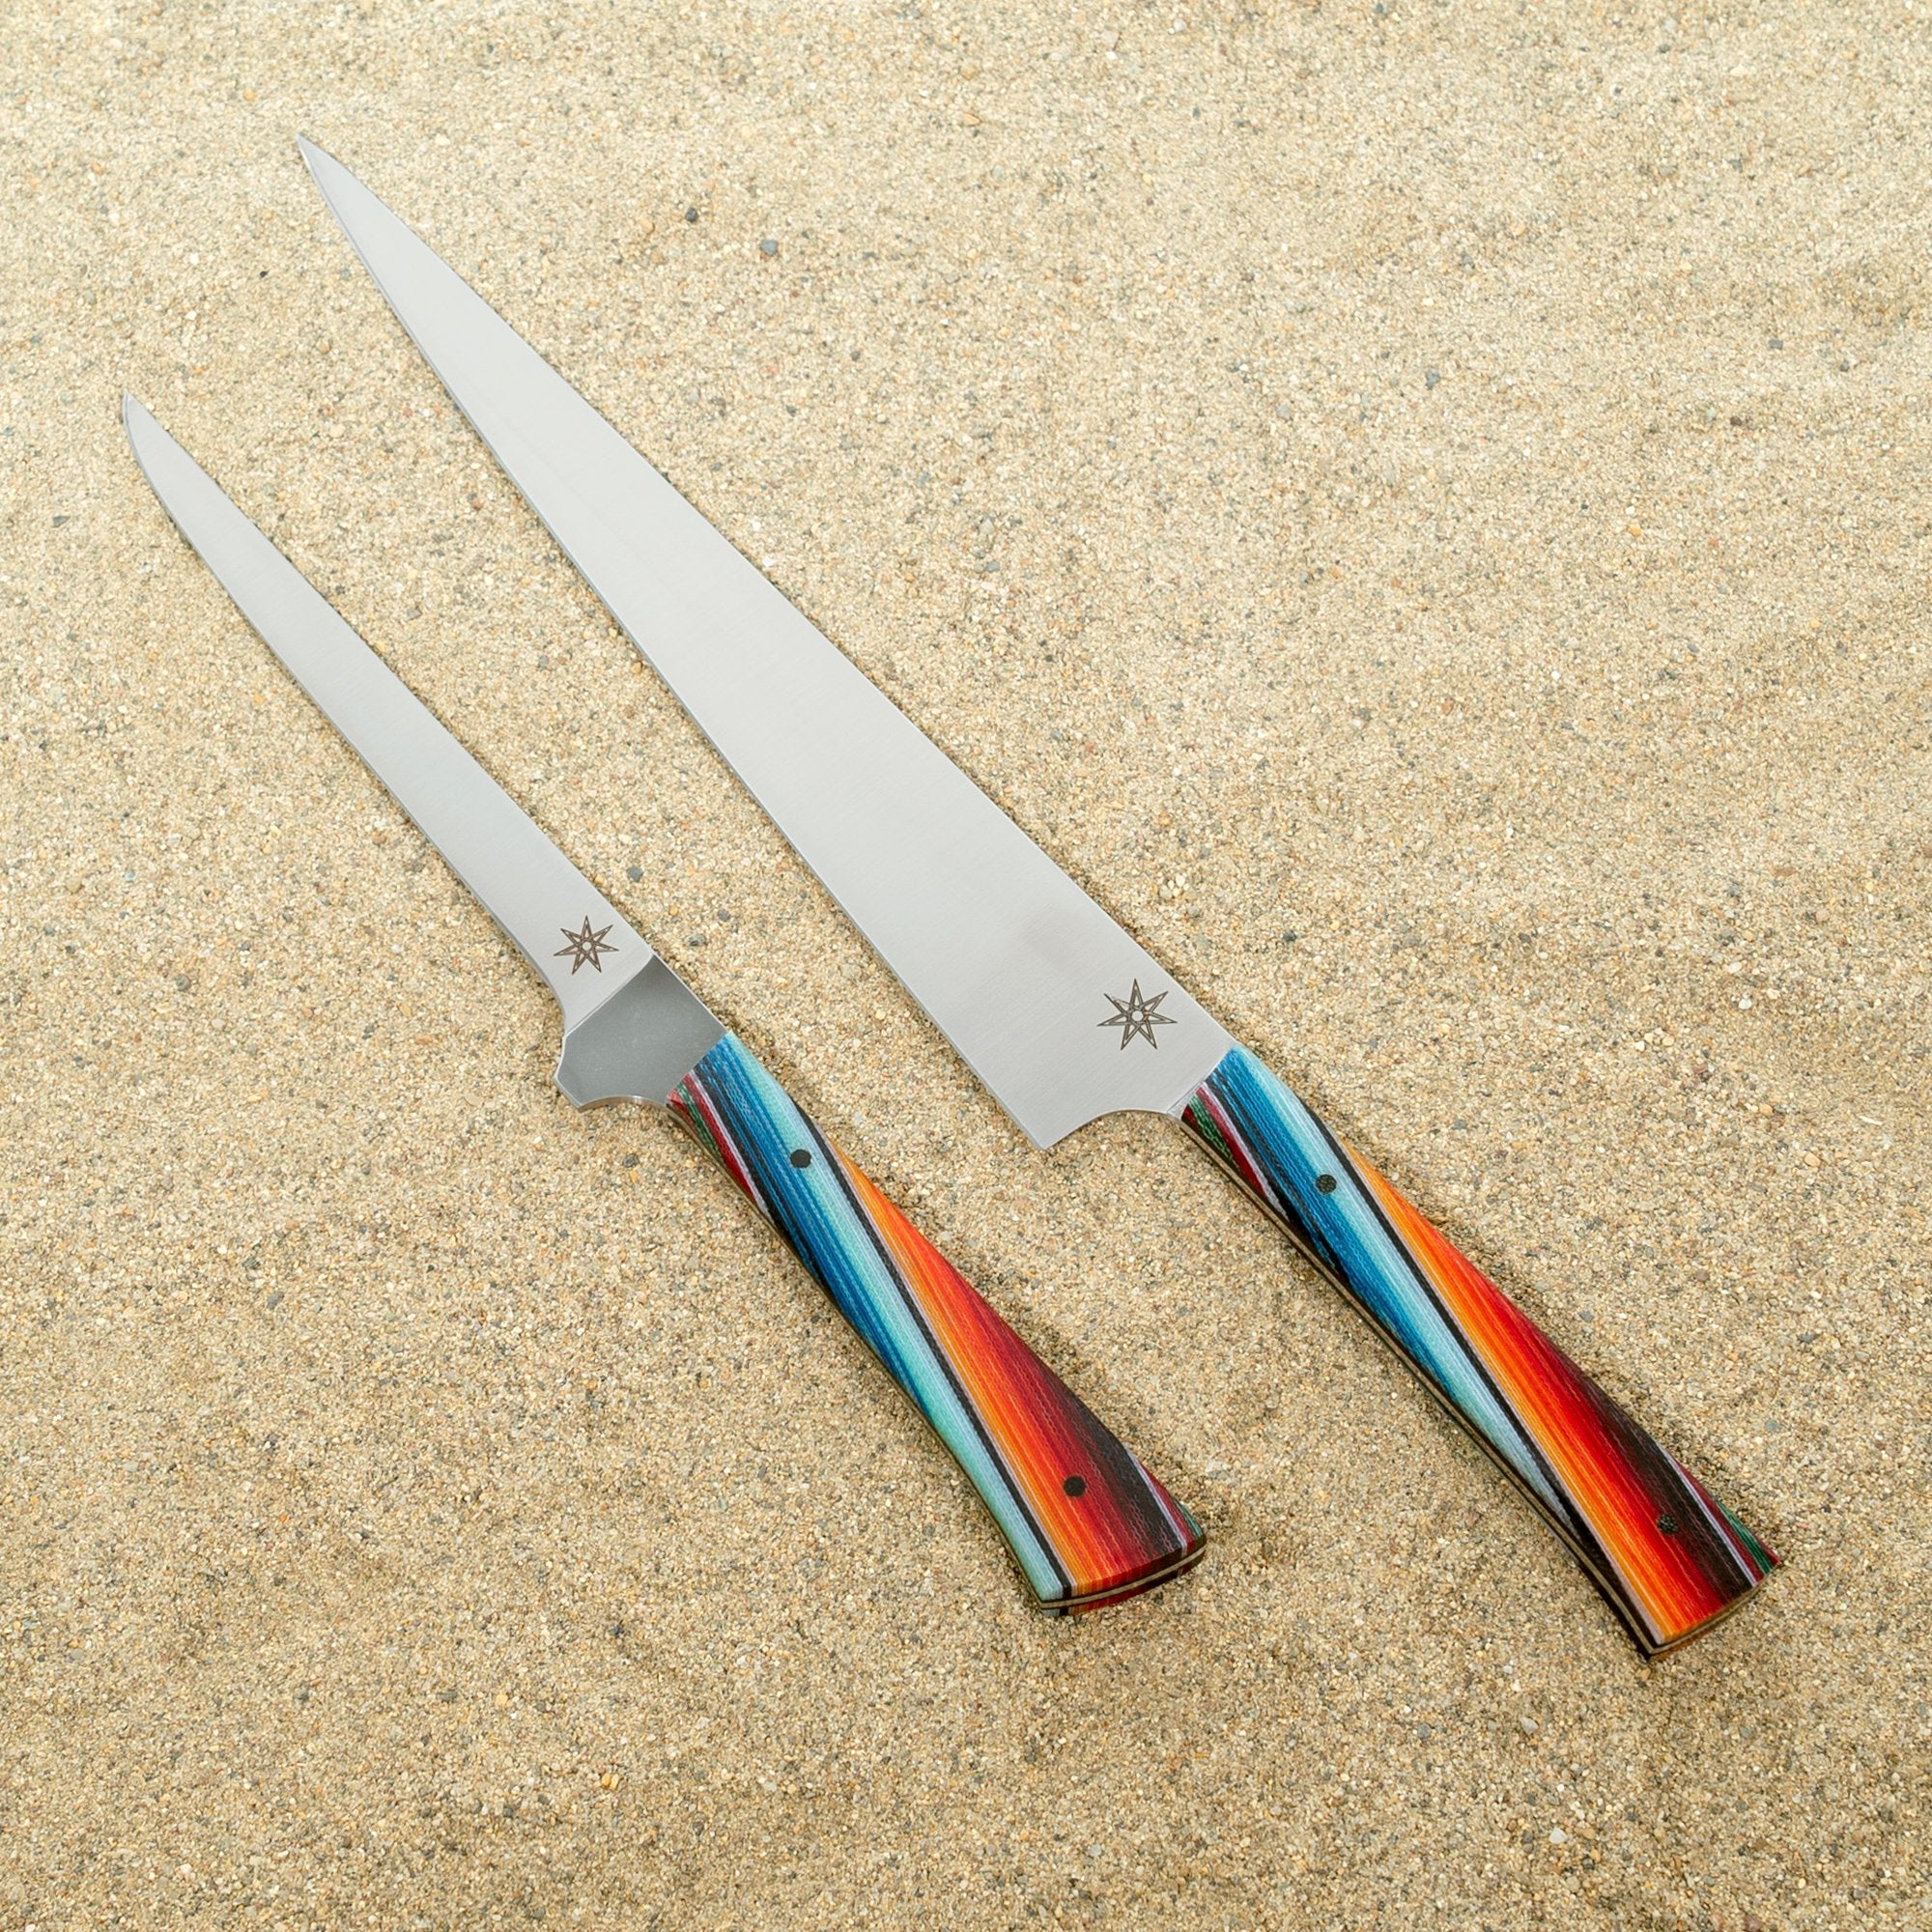 Town Cutler Baja 2 piece Butcher Knife Set with Straight Boning Knife and Carving Slicer Knife.